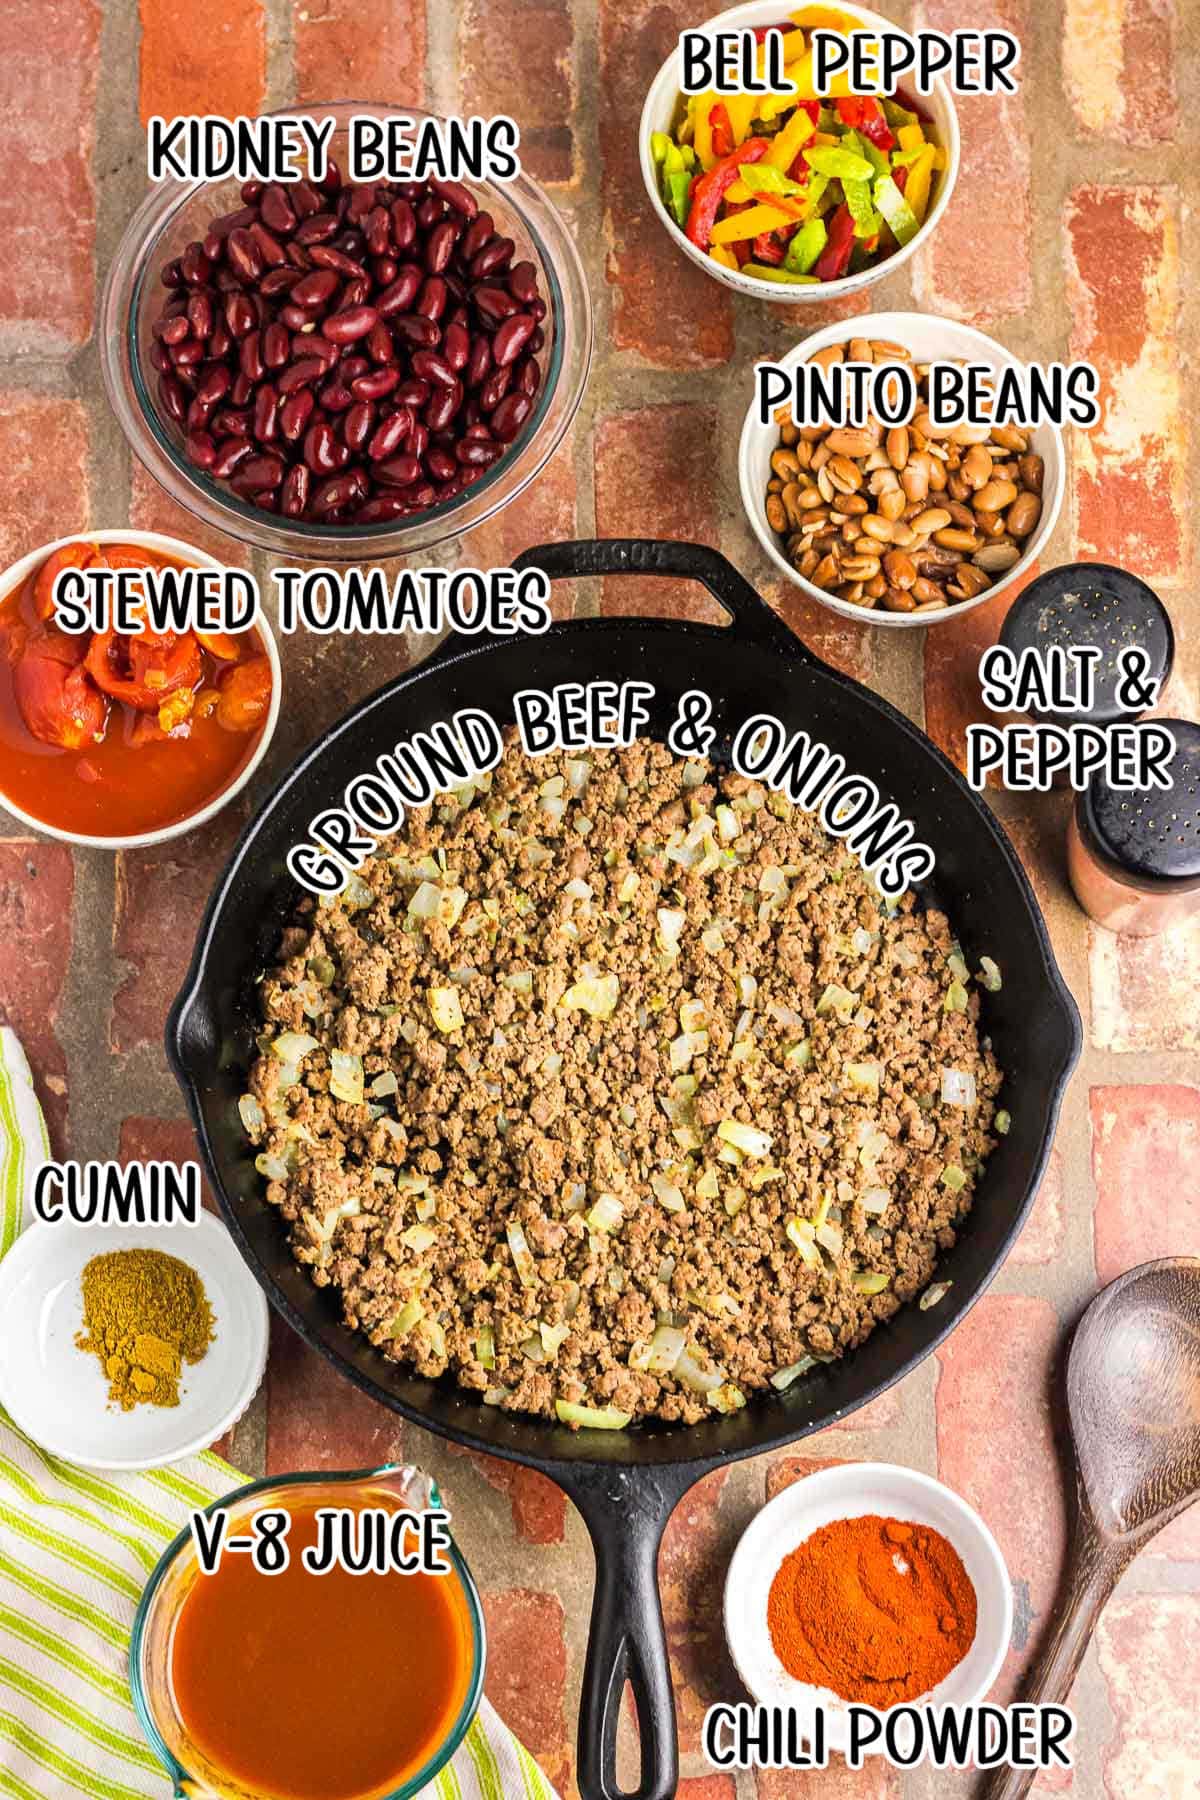 A photo of the chili recipe ingredients with text overlay.